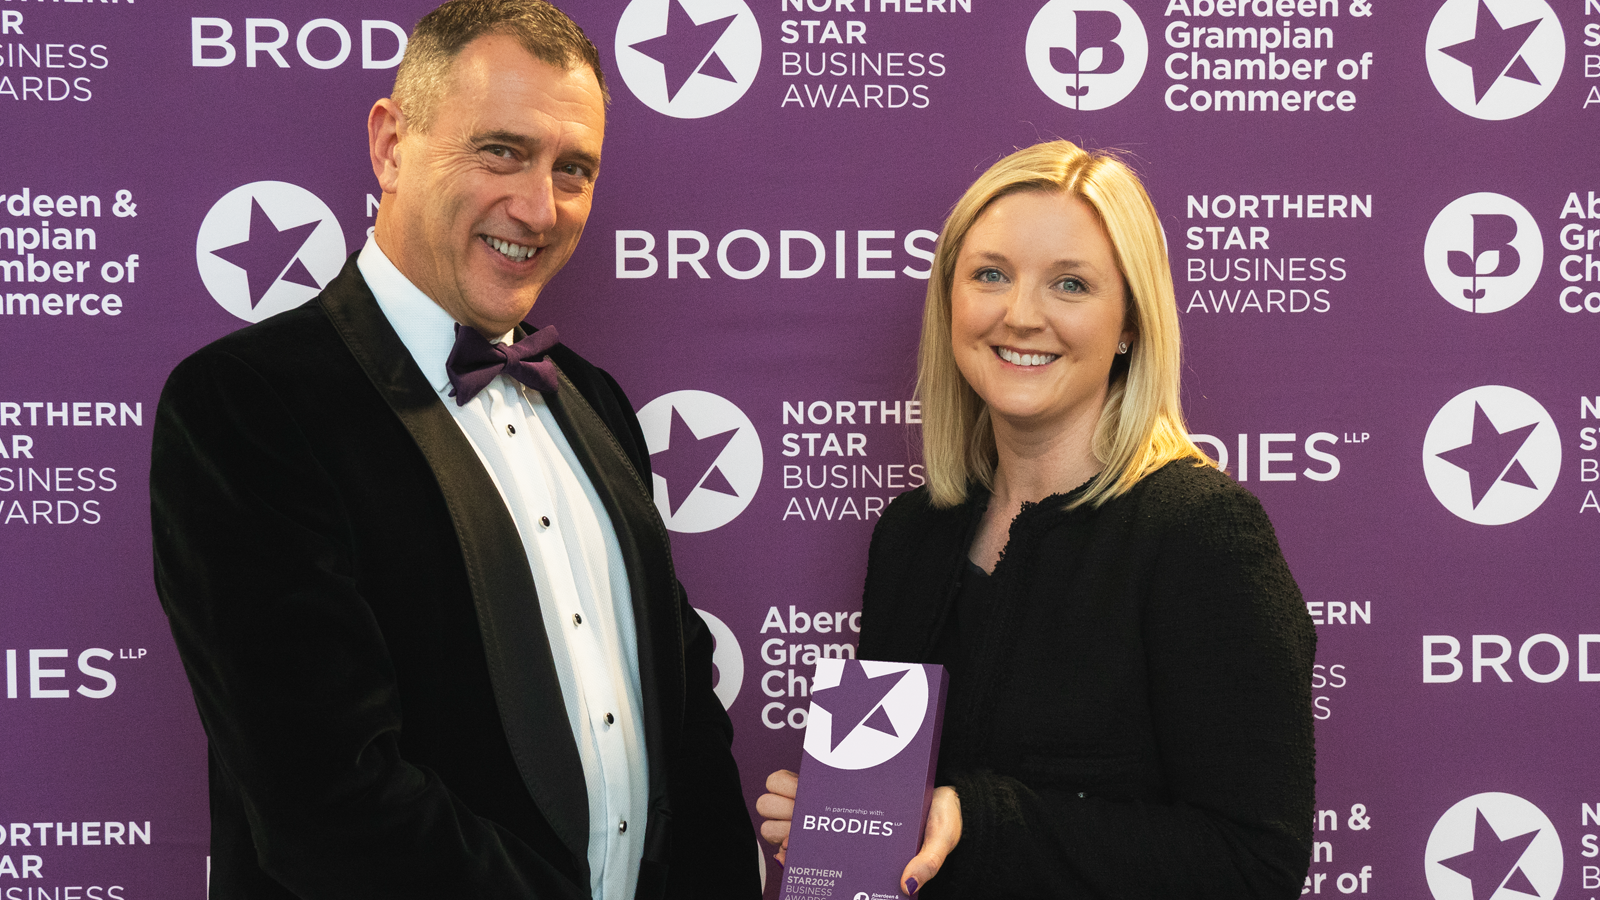 Russell Borthwick, Chief Executive of Aberdeen & Grampian Chamber of Commerce and Susie Mountain, Partner at Brodies LLP